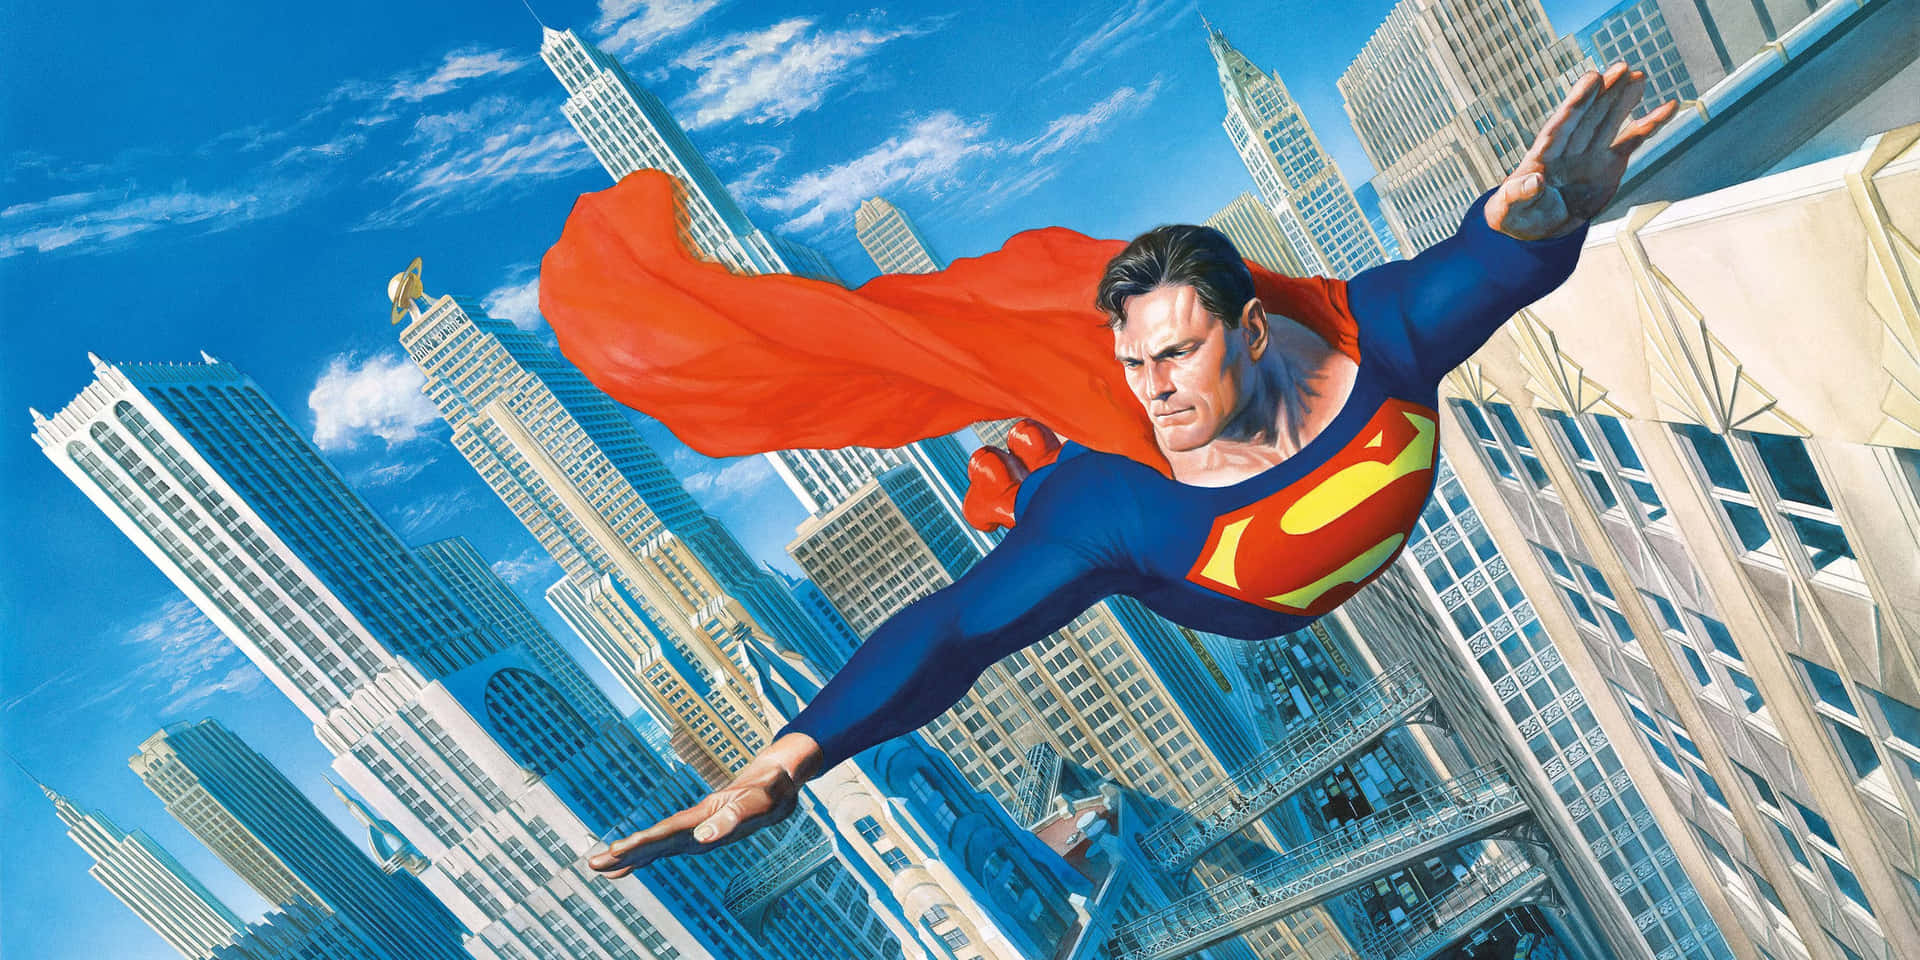 Superman Flying Over A City With Buildings